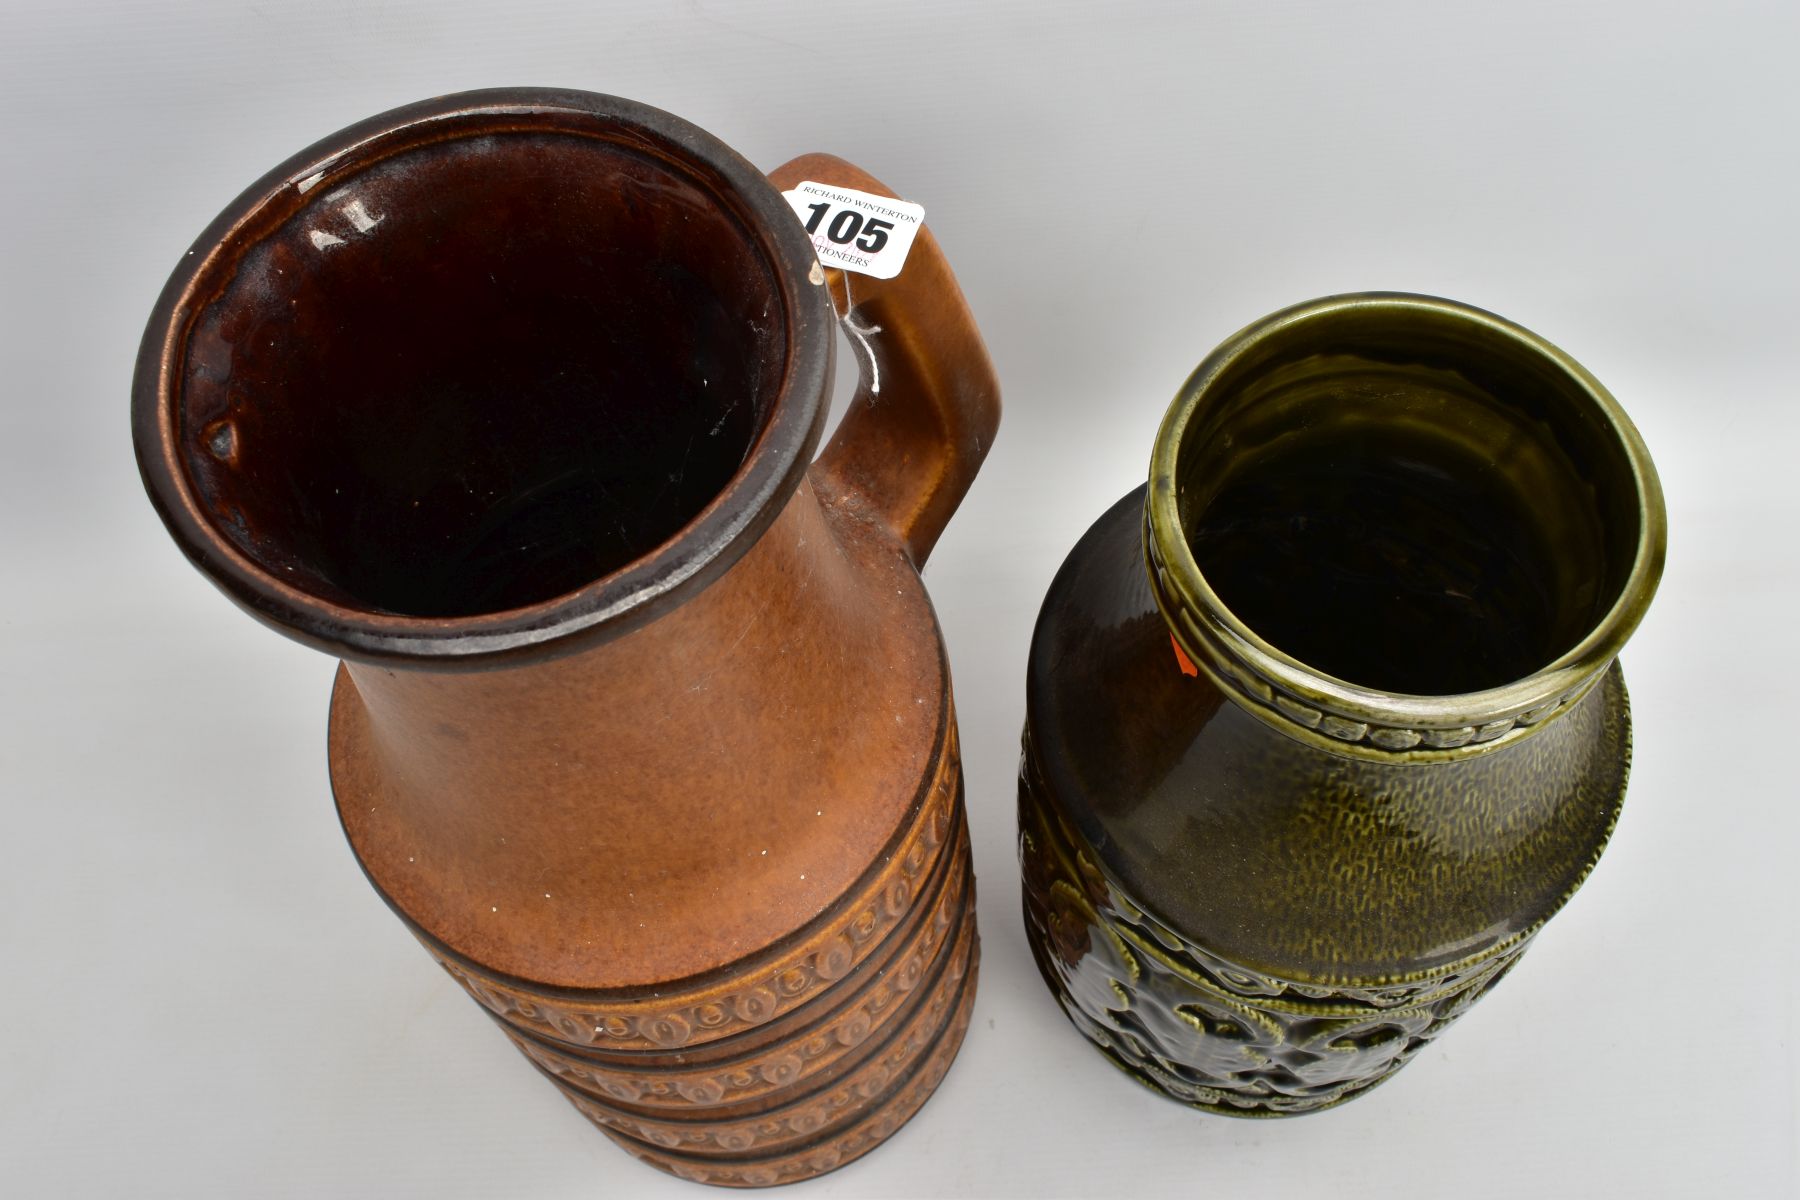 A WEST GERMAN POTTERY JUG WITH AN ART POTTERY VASE, the West German jug measuring 45cm high, being - Image 5 of 6